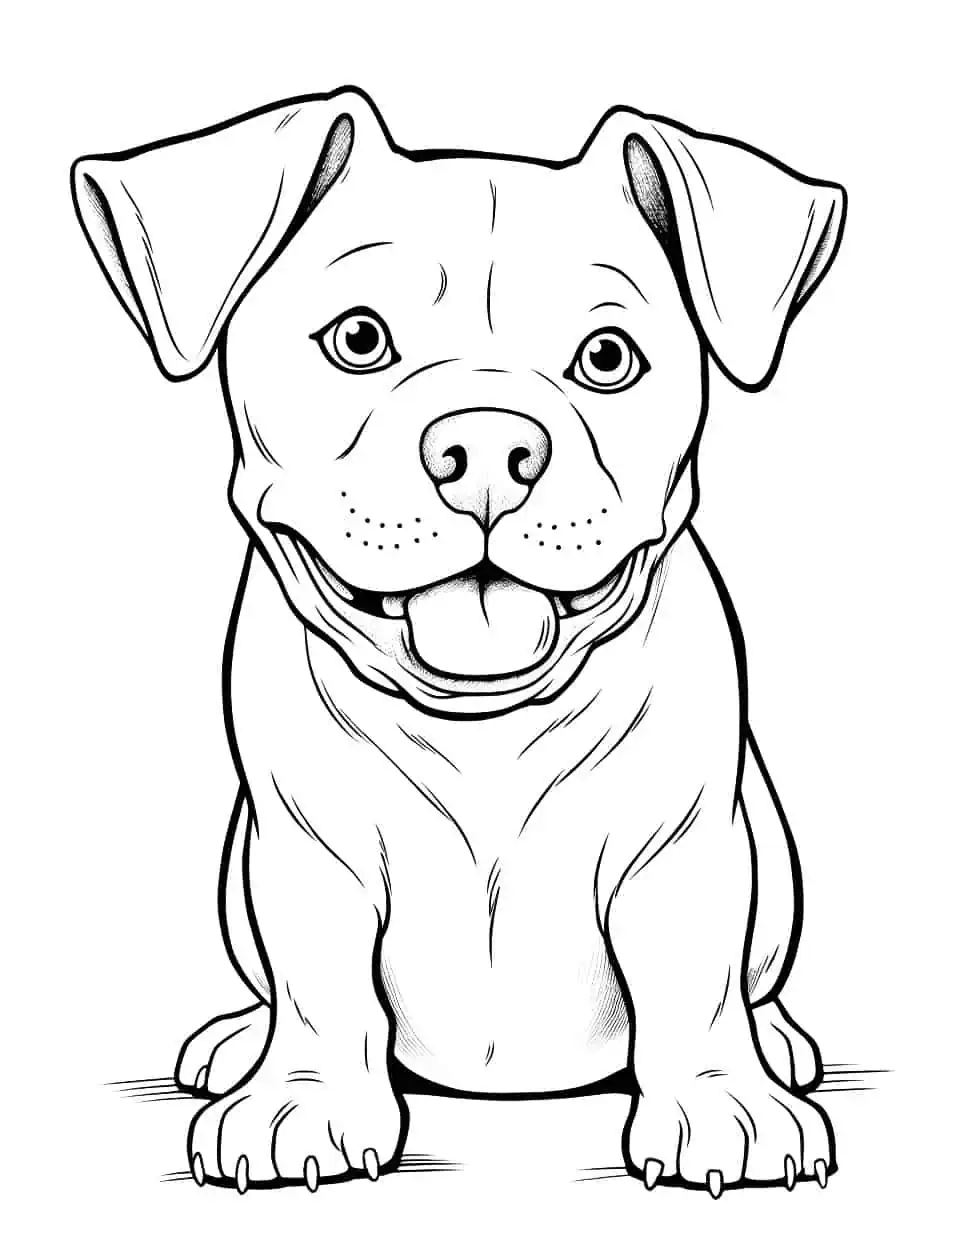 Easy Pitbull Portrait Dog Coloring Page - An easy-to-color, simplistic outline of a friendly Pitbull.